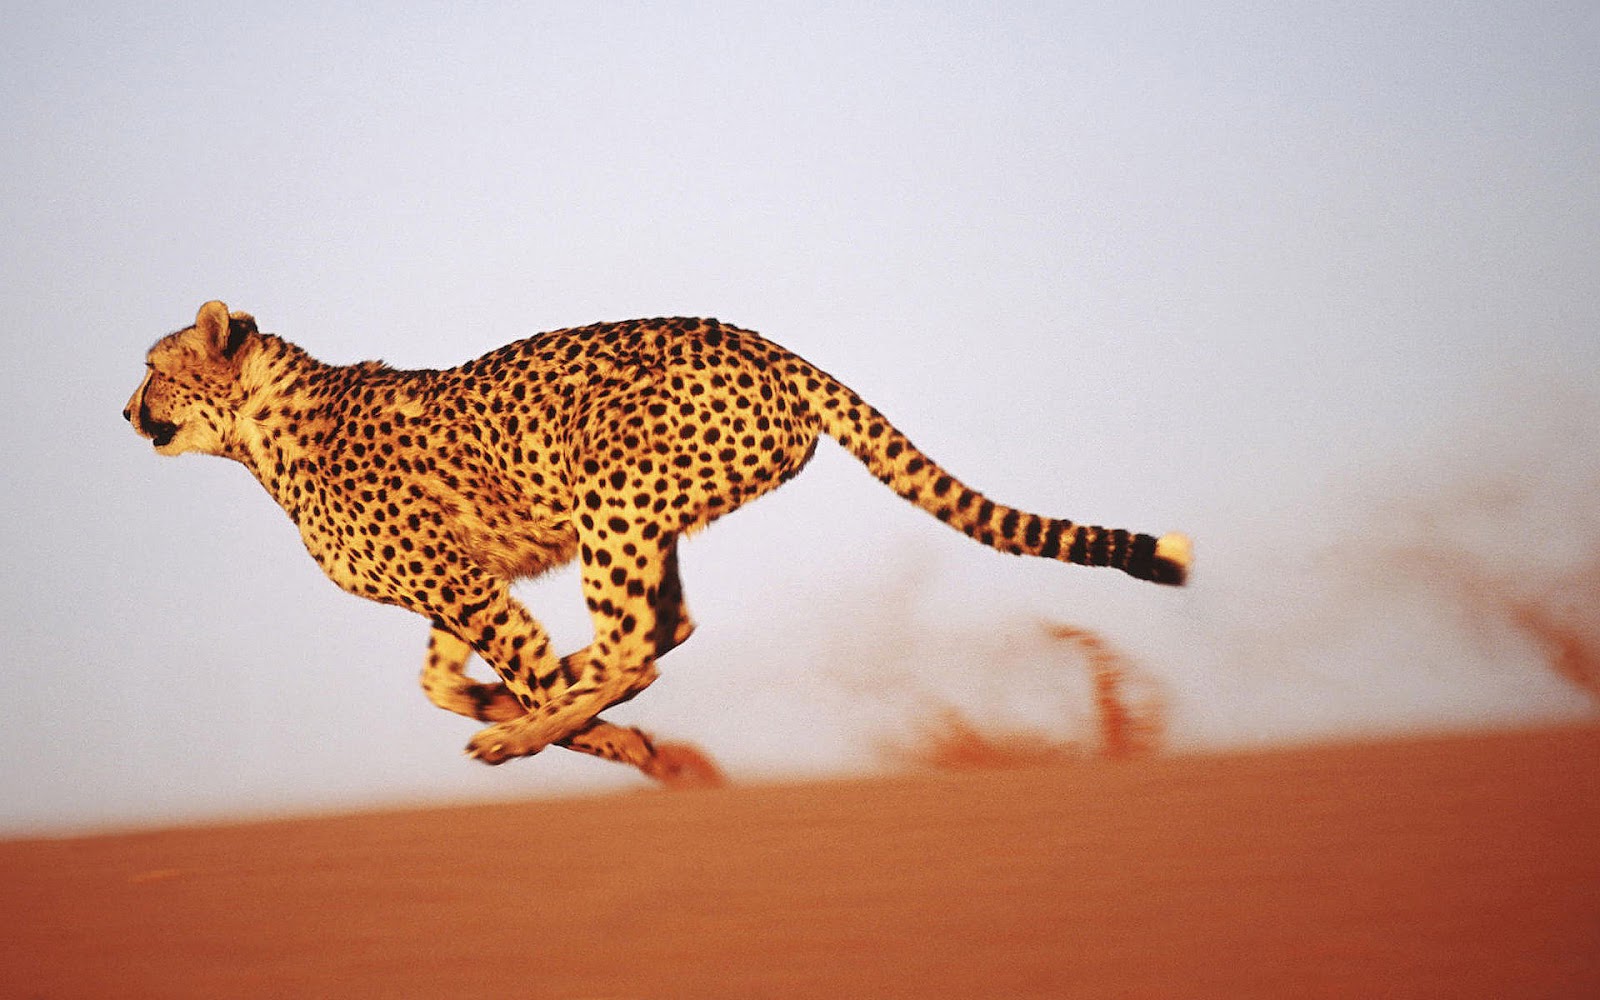 HD Animal Wallpaper With Fast Running Cheetah In The Desert